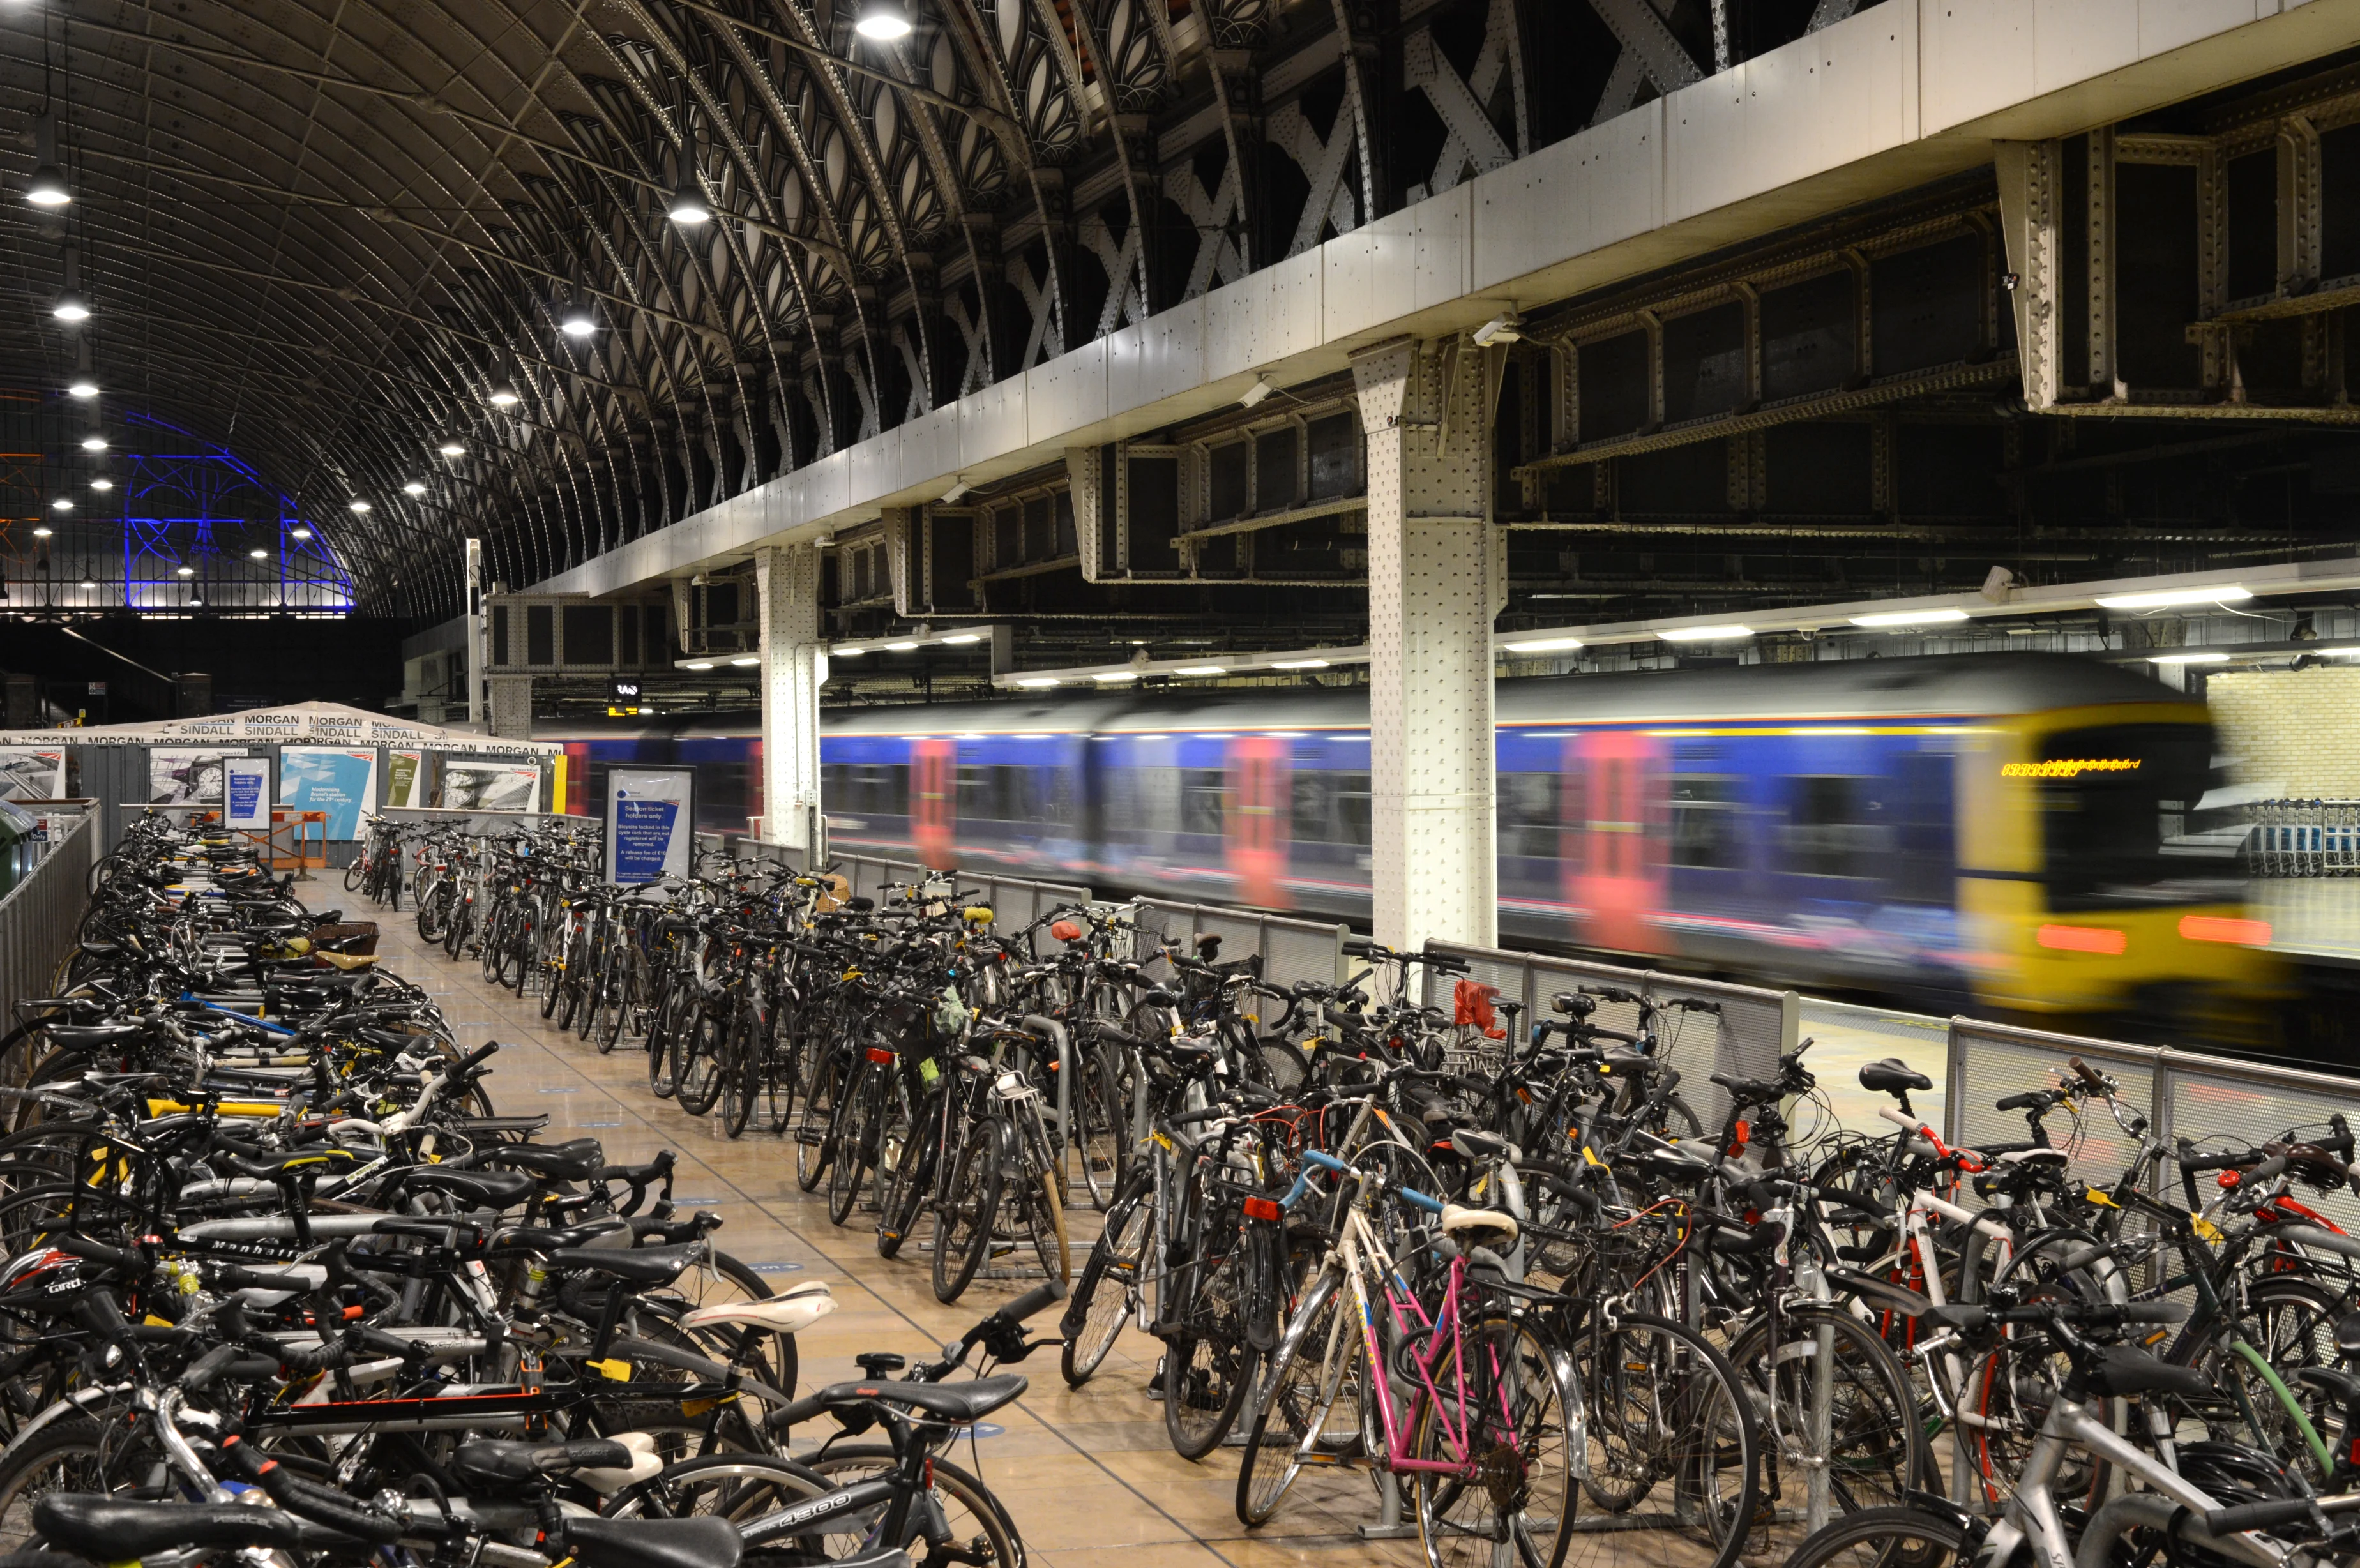 A very large bicycle parking area next to a station platform where a train is standing.